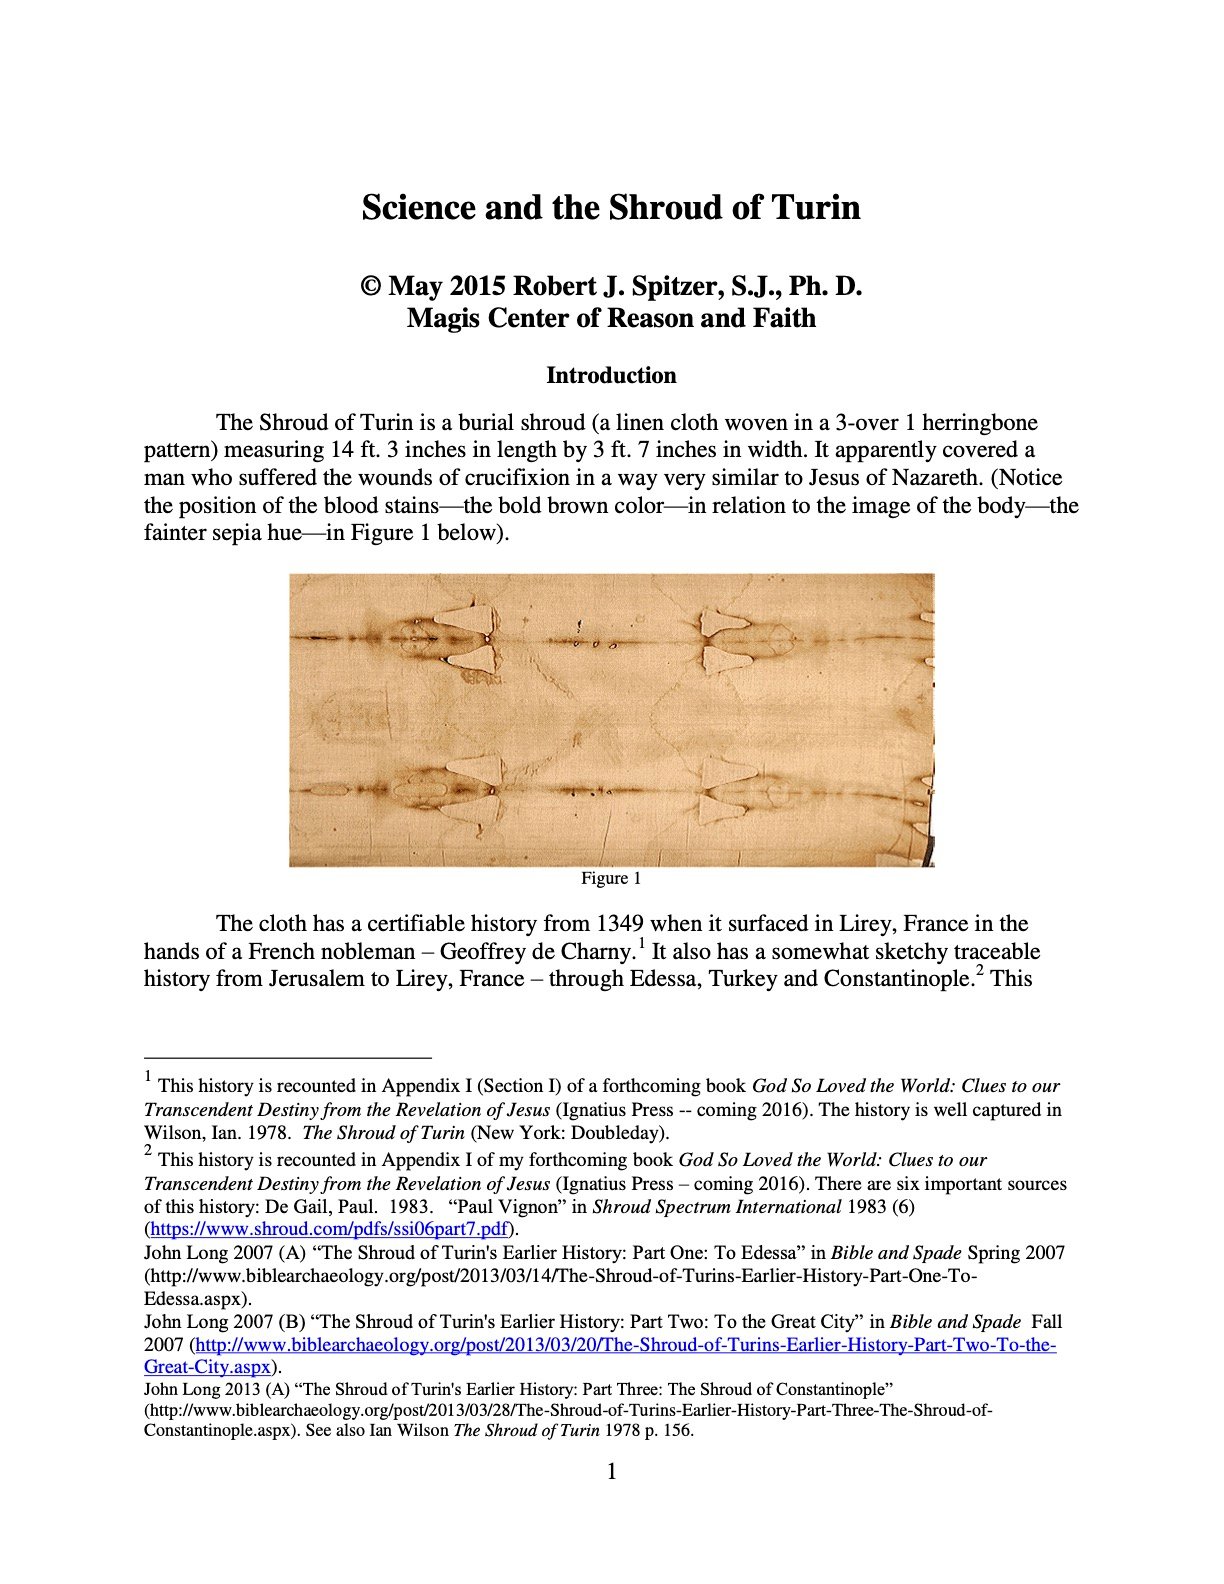 Science_and_the_Shroud_of_Turin_page_1